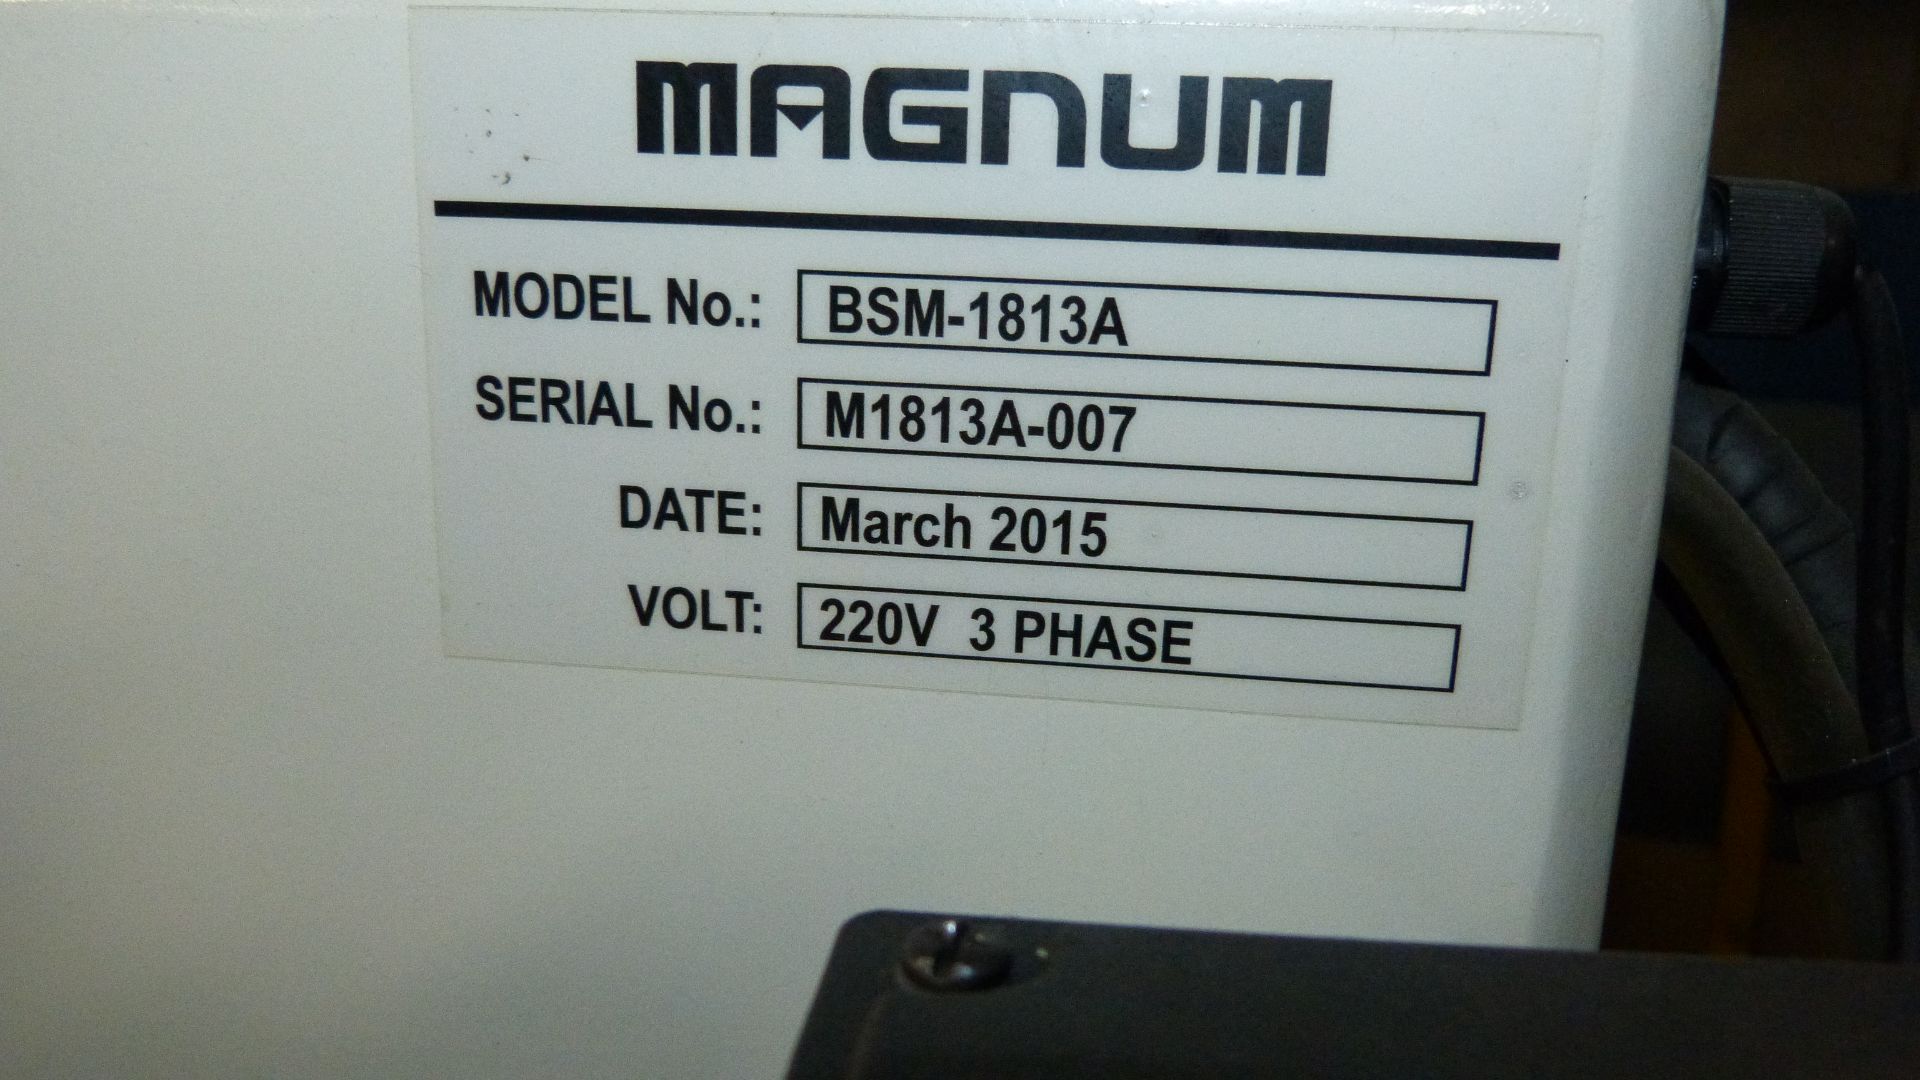 Magnun Model BSM-1813A Horizontal Bandsaw, 24"x15" Capacity, Brand New Never Used, New 2015 - Image 5 of 6